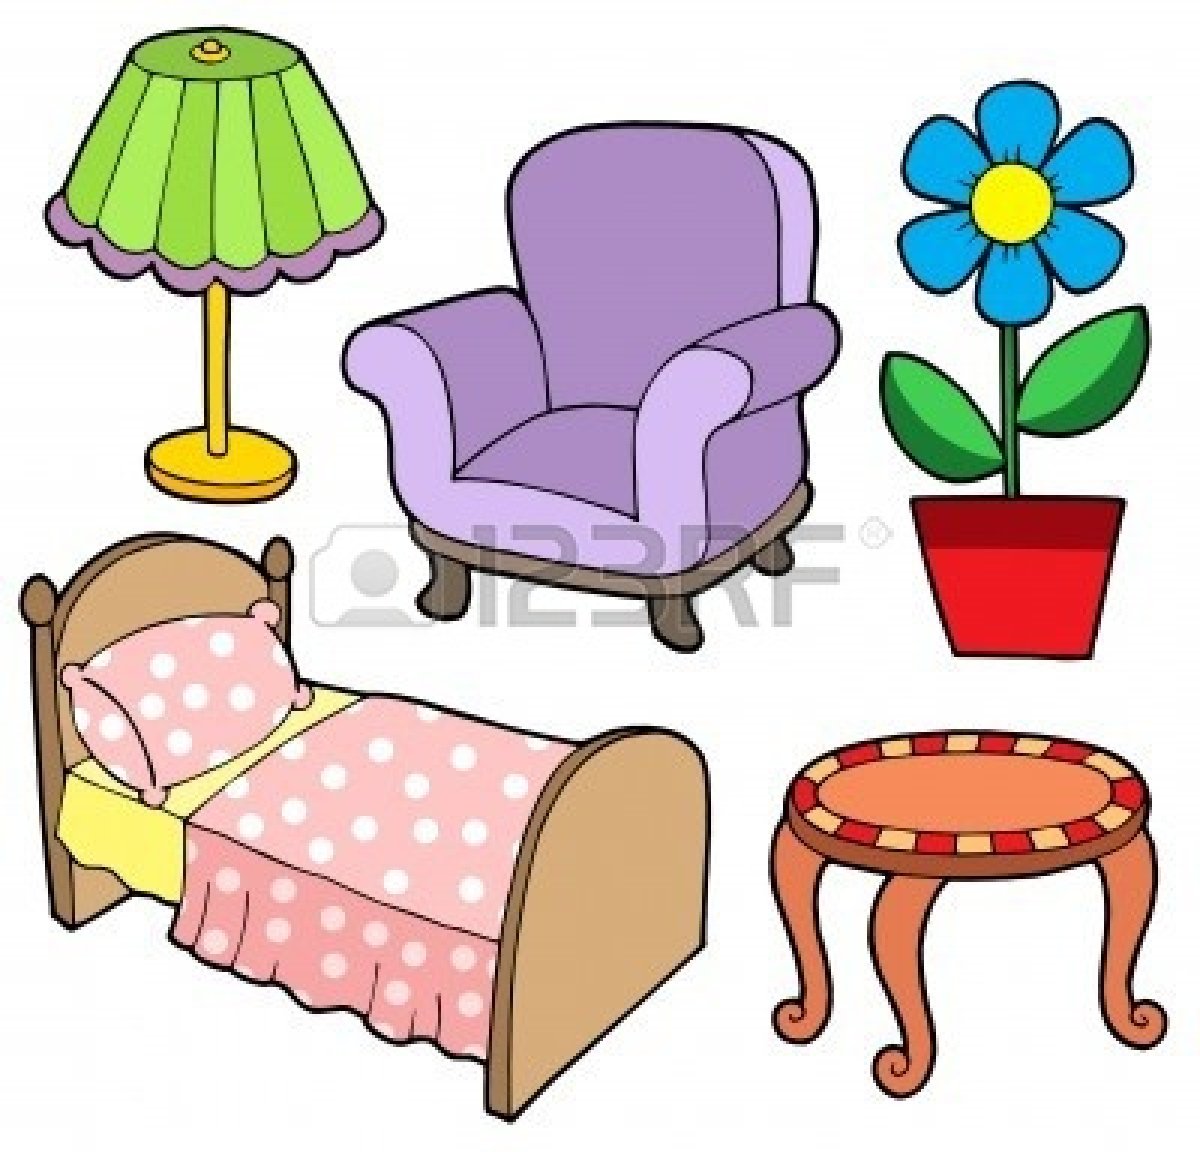 Furniture clipart 5 » Clipart Station.